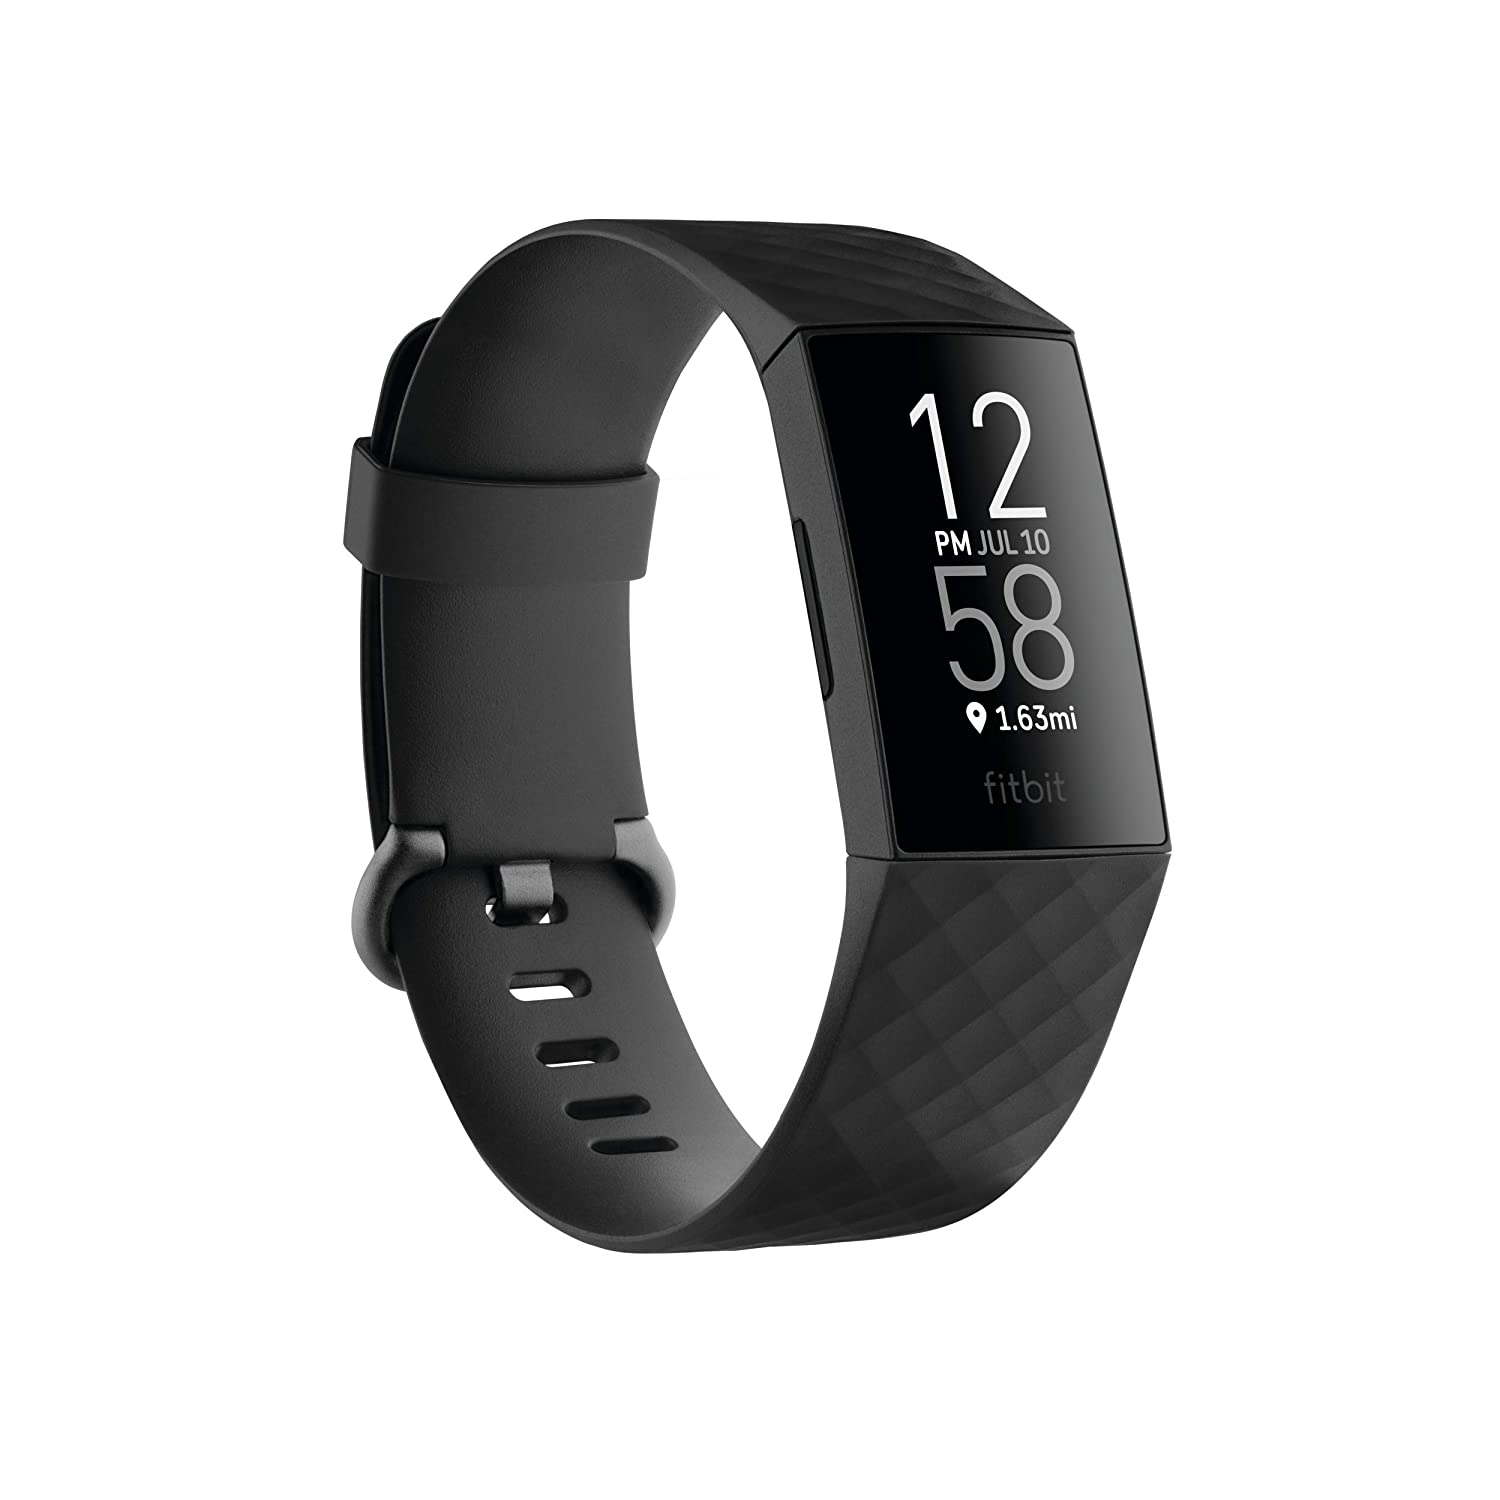 Fitbit Charge 4 multi-sport watch/fitness tracker review with a comparison table